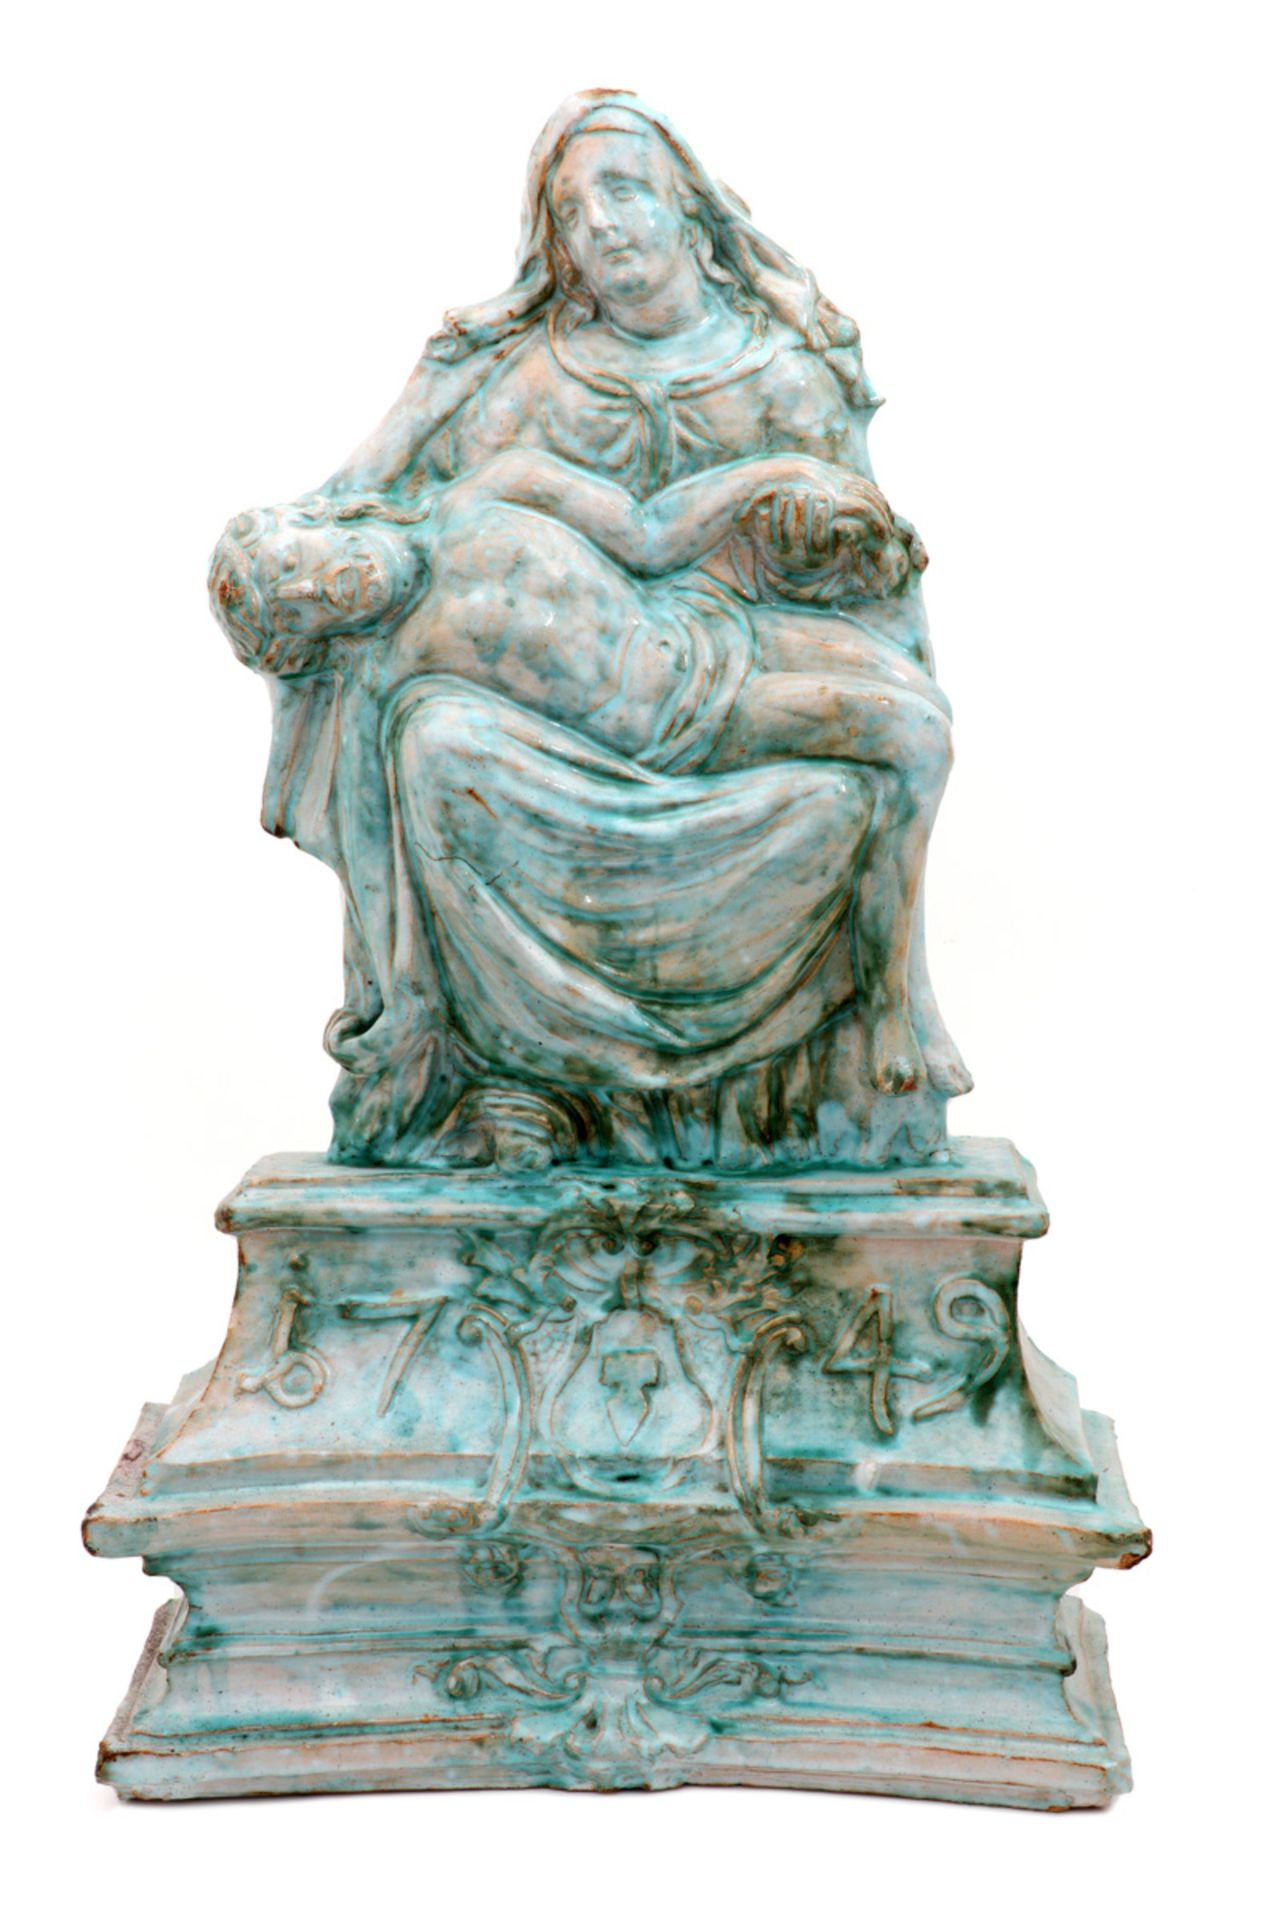 AN AUSTRIAN CERAMIC PIETÀ Austrian ceramic from Gmunden. Decoration in blue and white shades. With